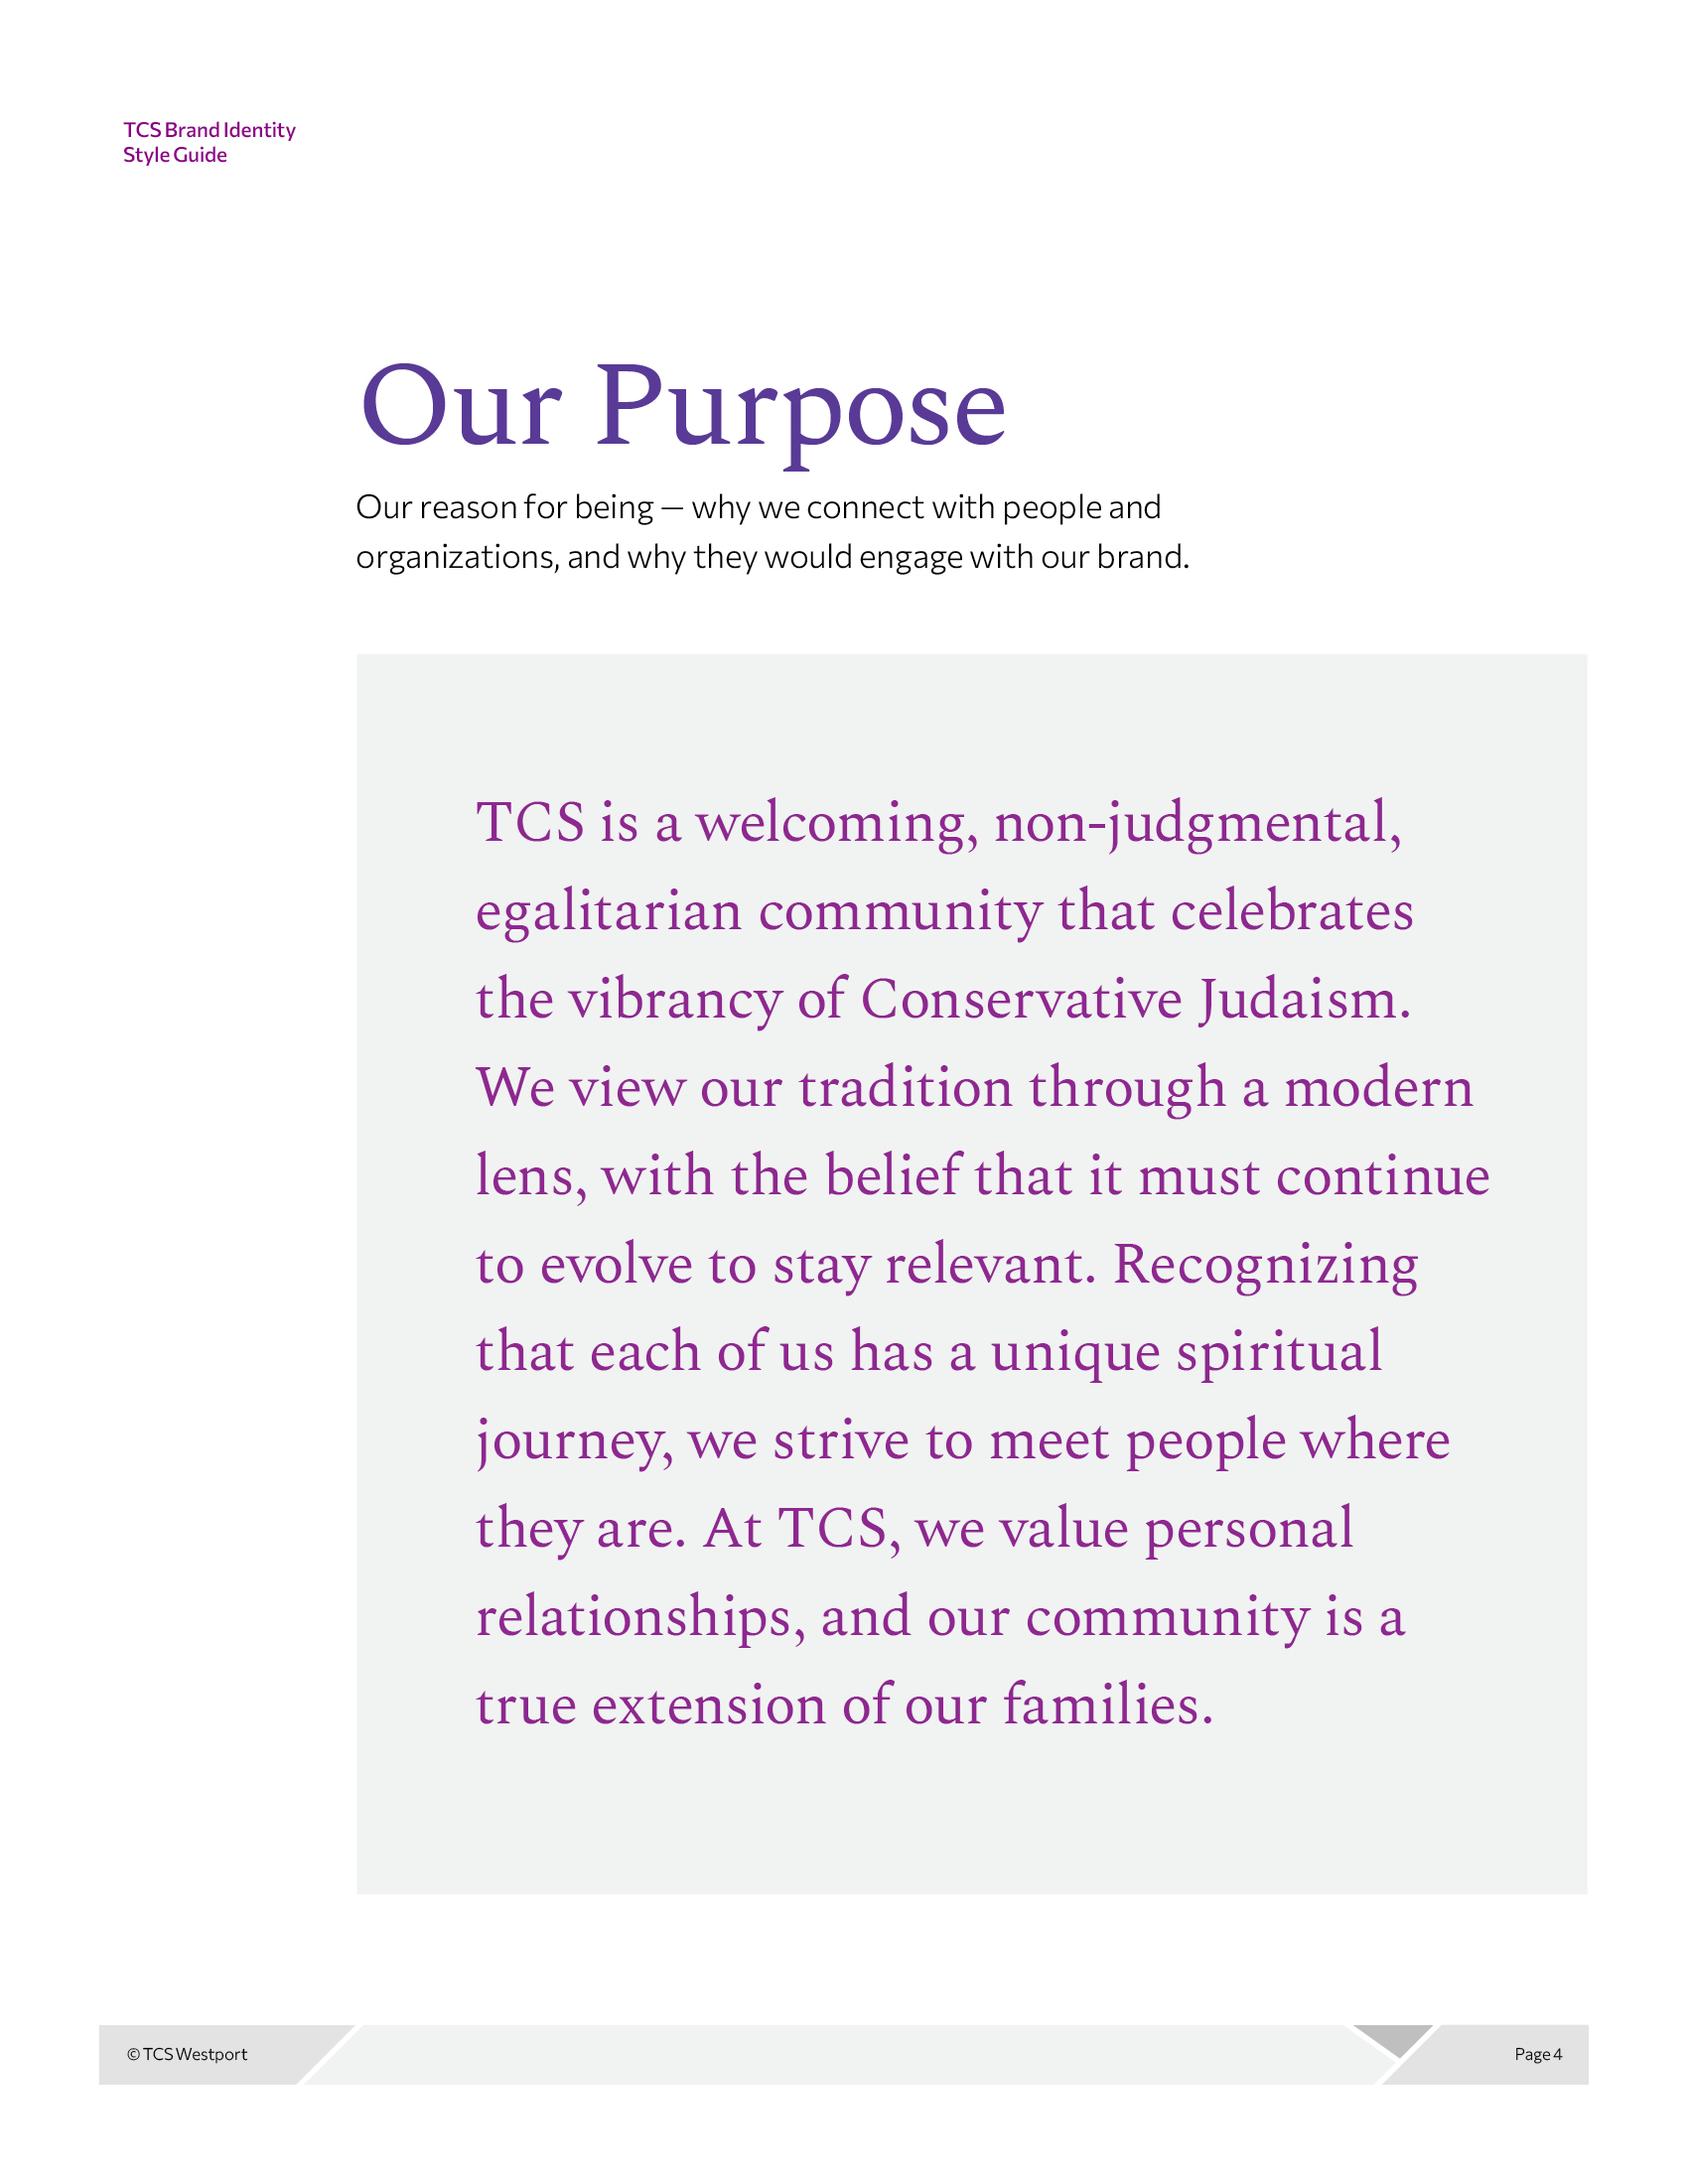 TCS_Brand_Style_Guide_6_274